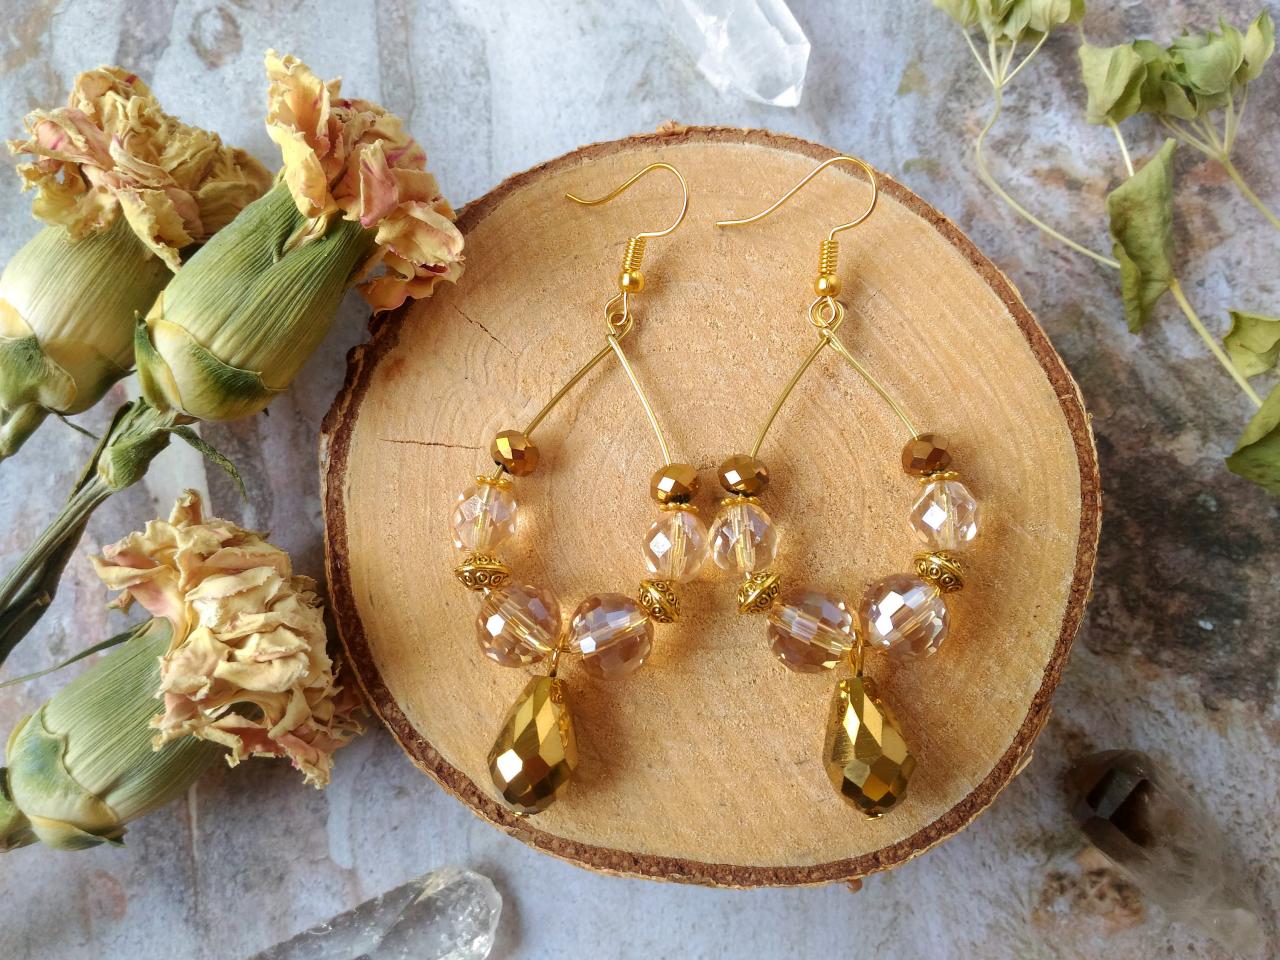 Sparkles Collection - Gold Boho Hoops With Drop, Bohemian Hoop Earrings, Golden Chandelier Earrings, Sparkly Gypsy Earrings, Gift For Her.